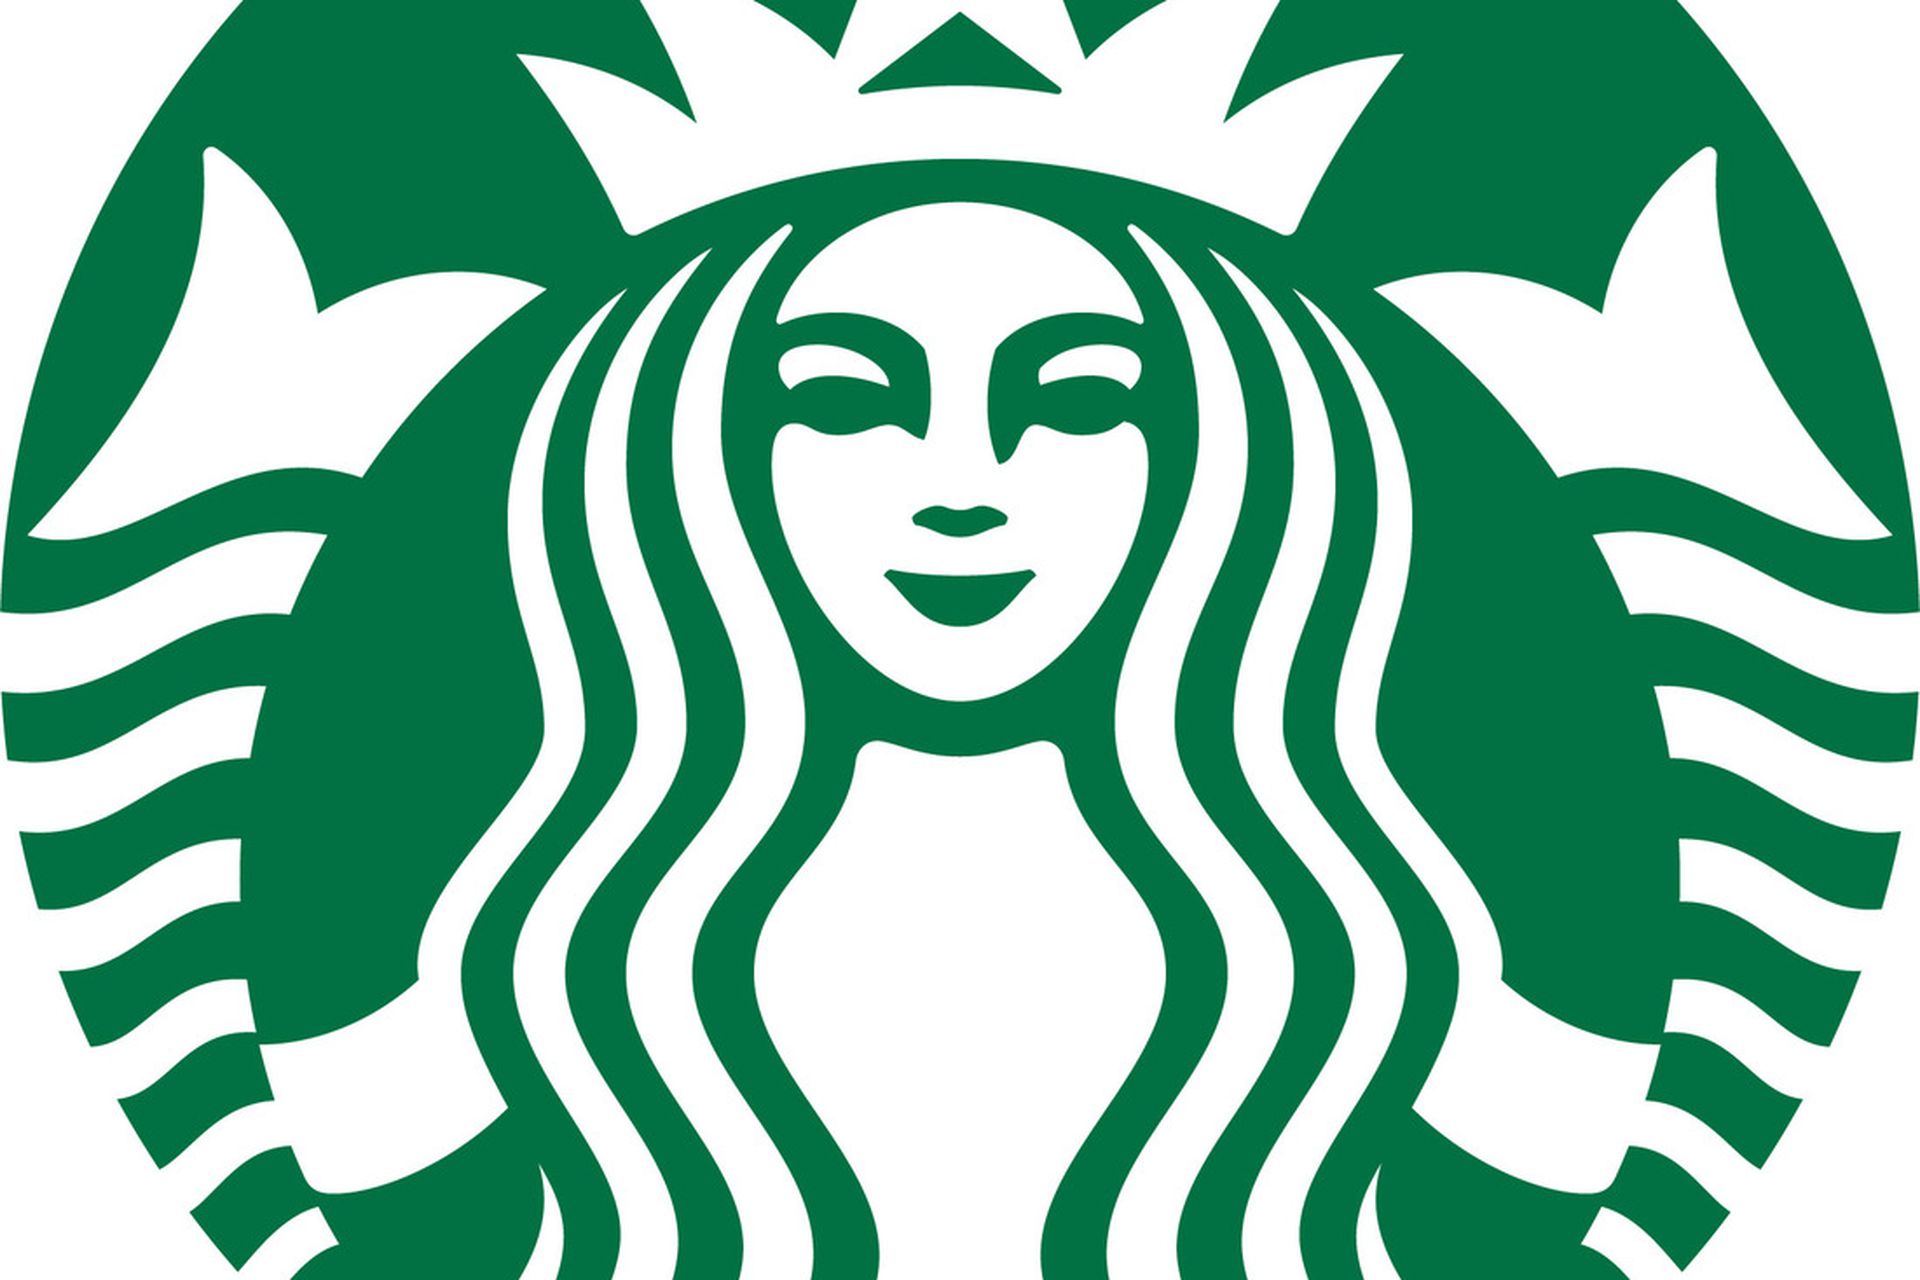 Starbucks UK embraces Olympics, freeloaders offers free oneclick Wi